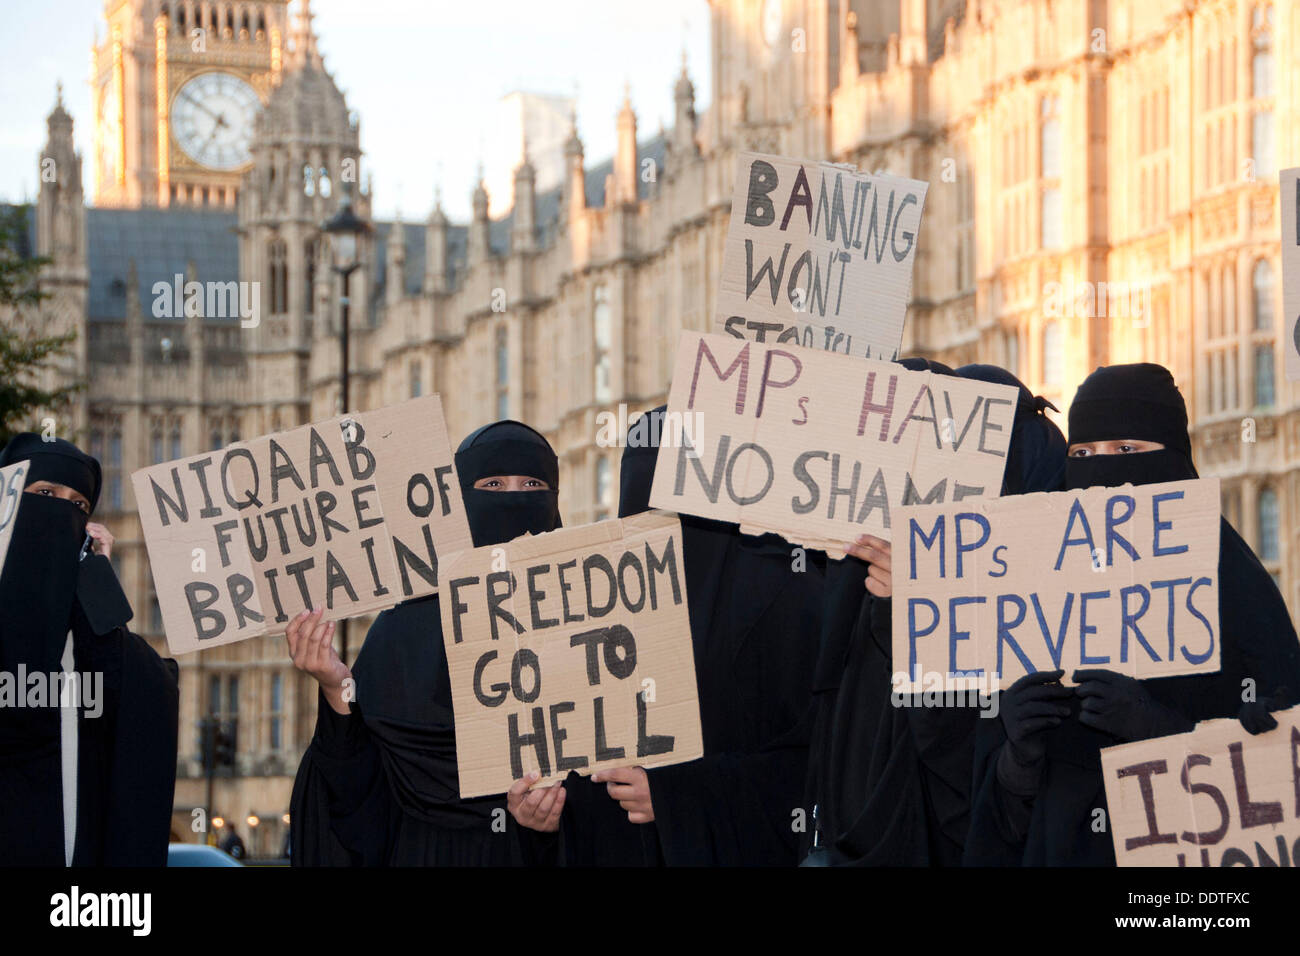 london-uk-06th-sep-2013-muslim-women-outside-the-houses-of-parliament-DDTFXC.jpg